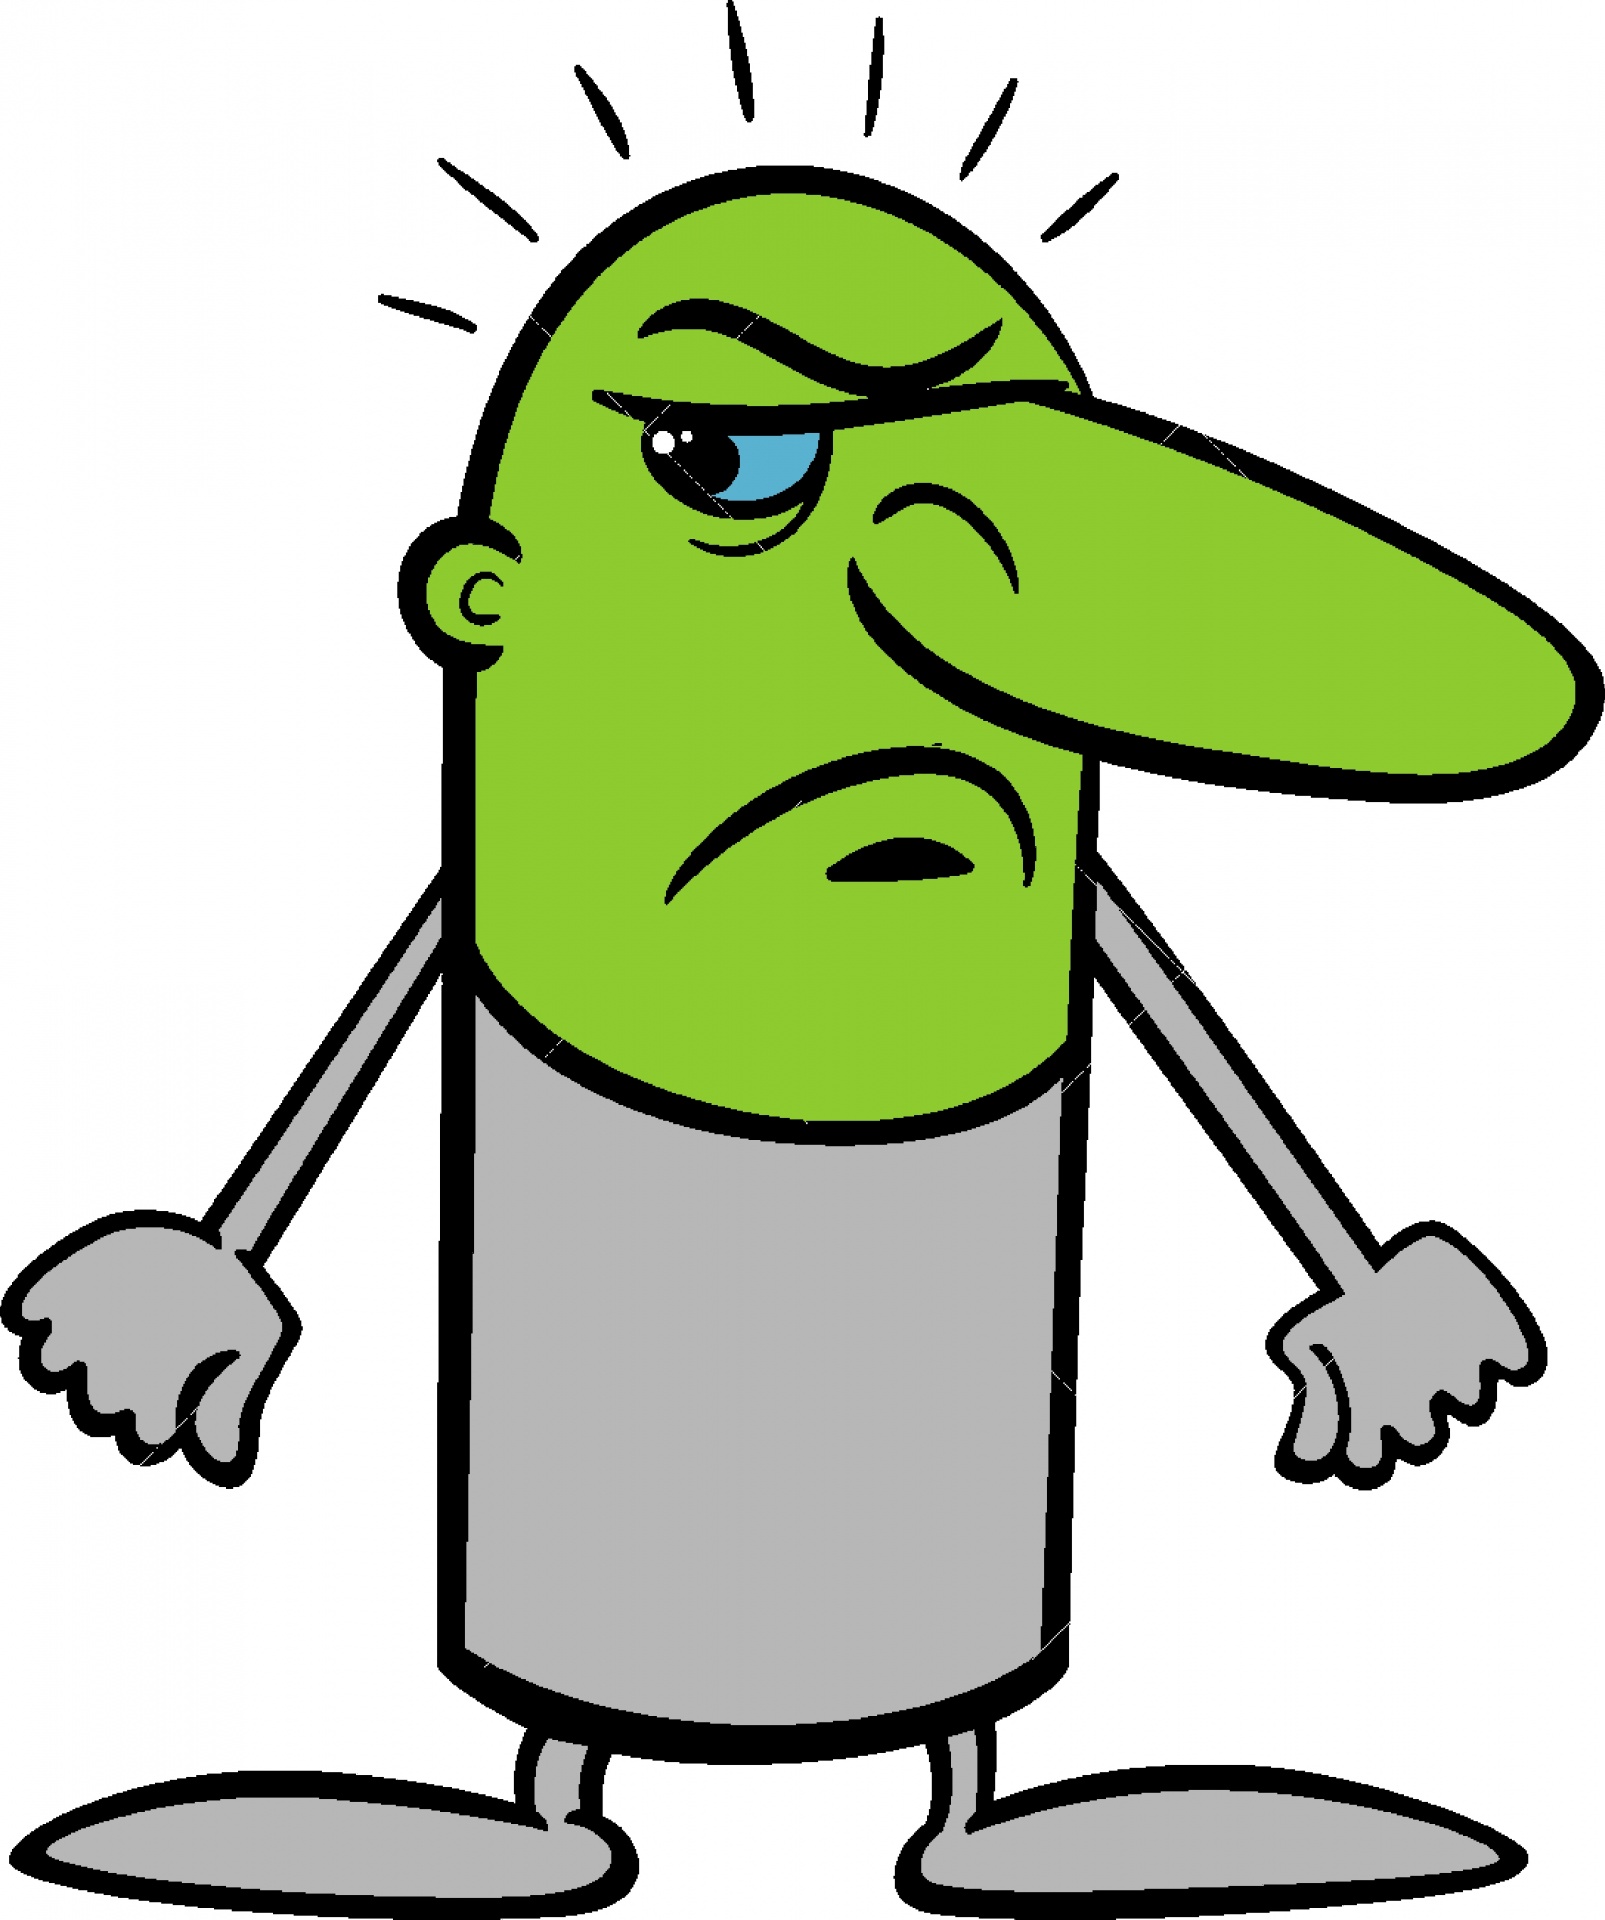 Download free photo of Angry,stick,man,cartoon,doodle - from 